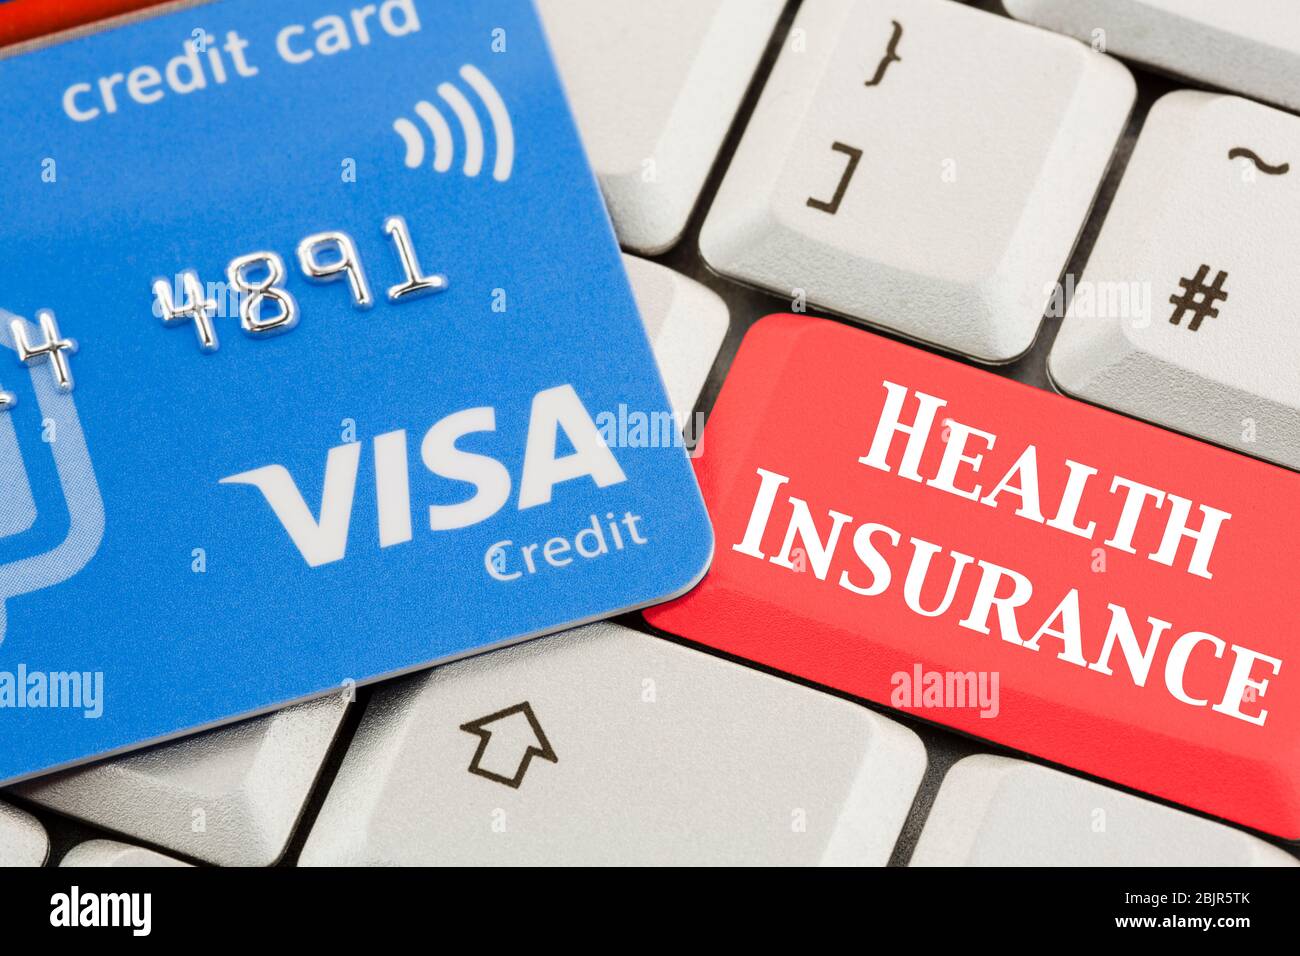 Visa credit card on a keyboard with a HEALTH INSURANCE on a red enter key.  Paying for private healthcare concept. England UK Britain Stock Photo -  Alamy